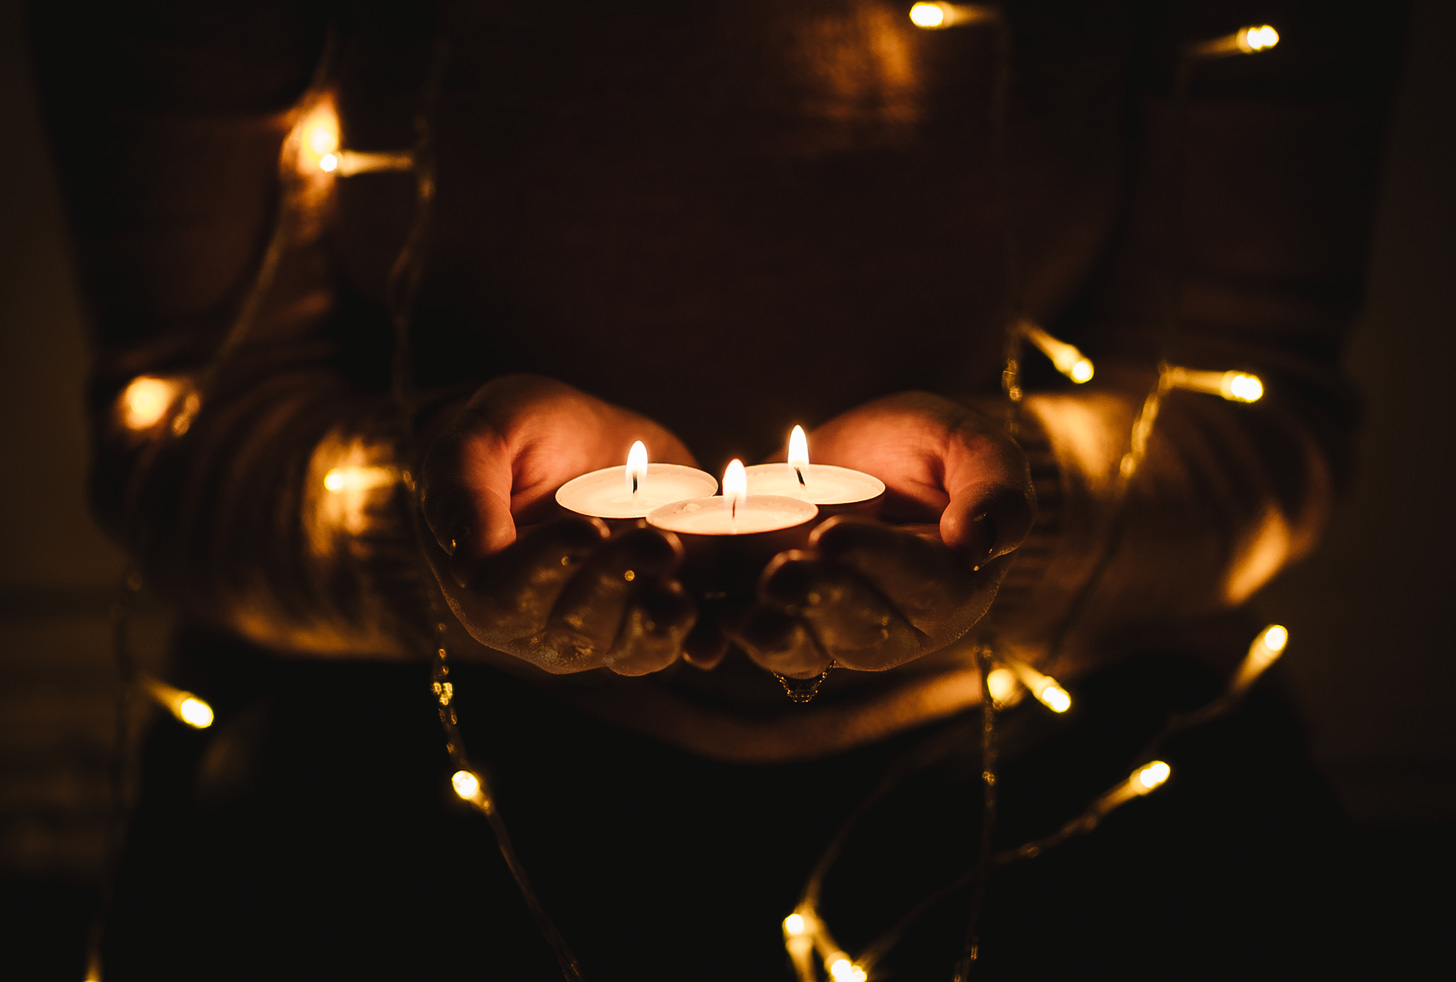 Two outstretched hands holding three votive candles surrounded by small white lights